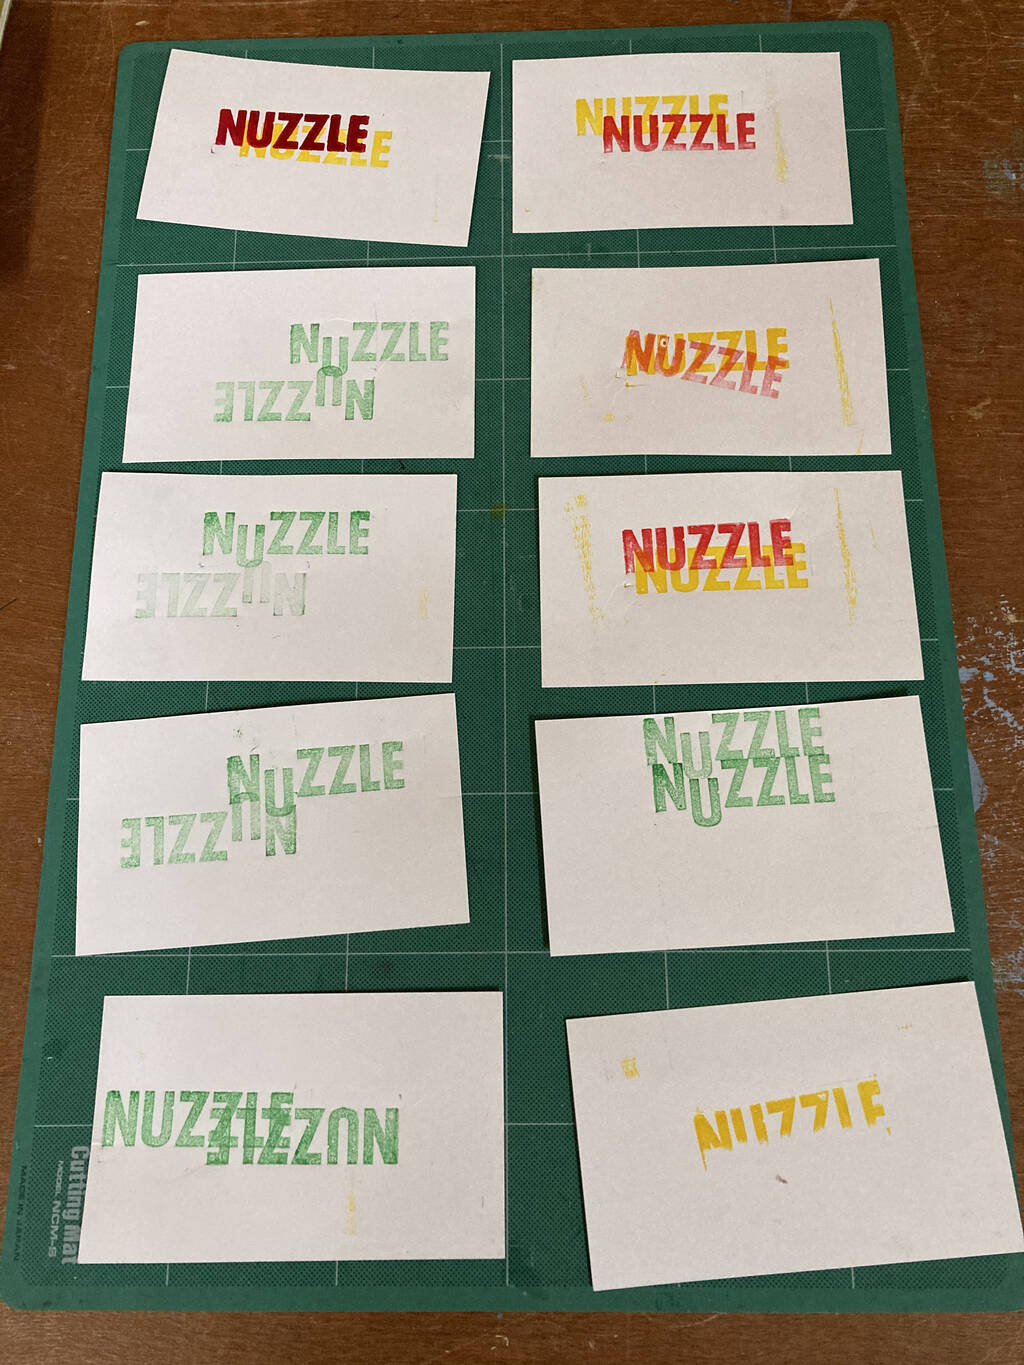 A collection of NUZZLE test prints.